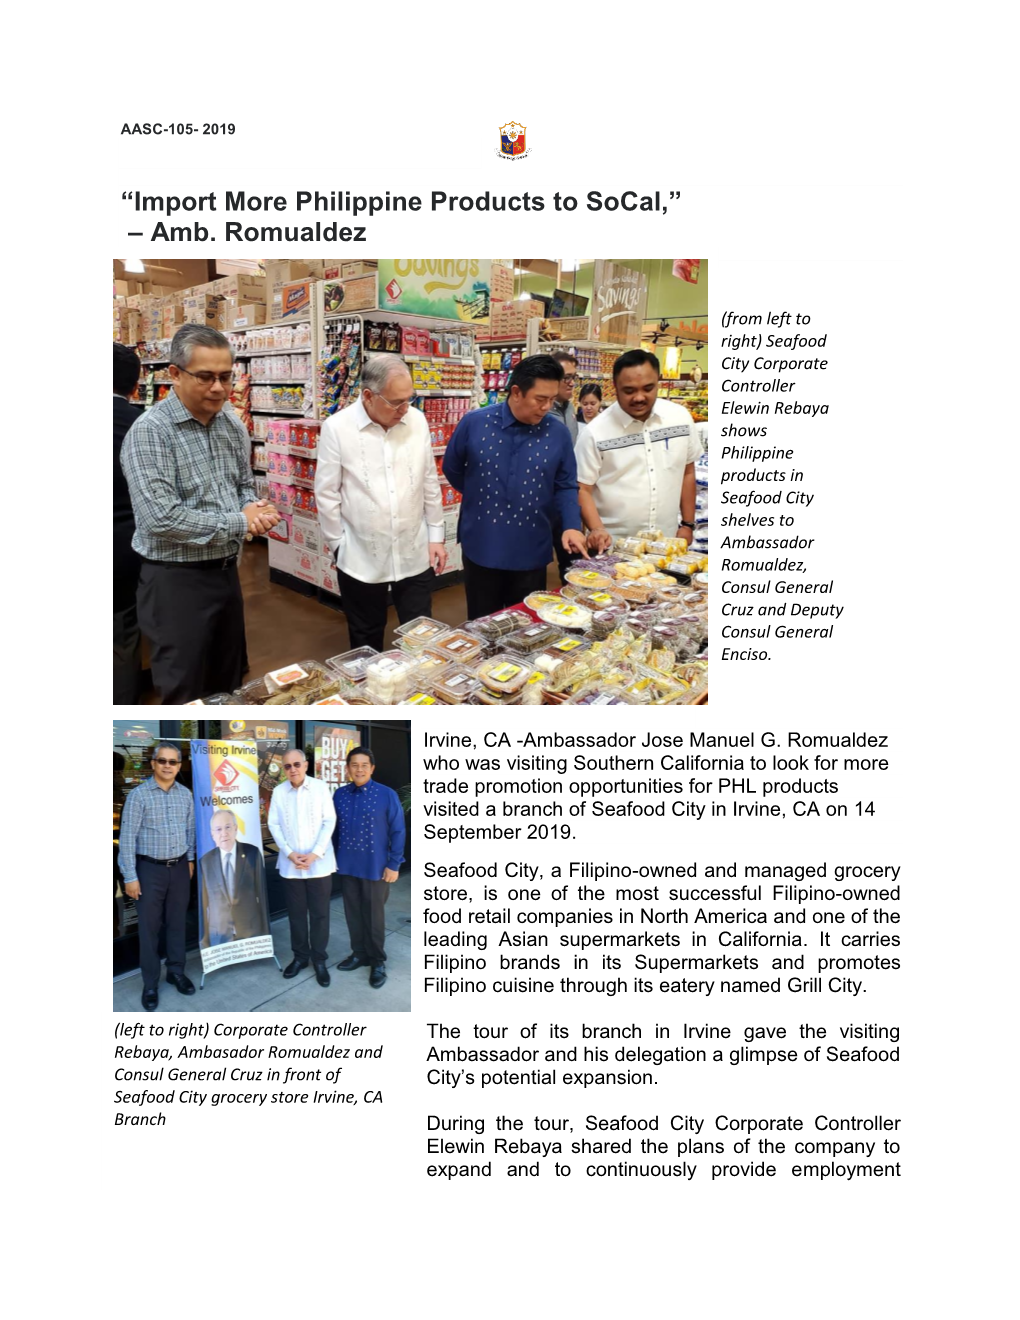 “Import More Philippine Products to Socal,” – Amb. Romualdez